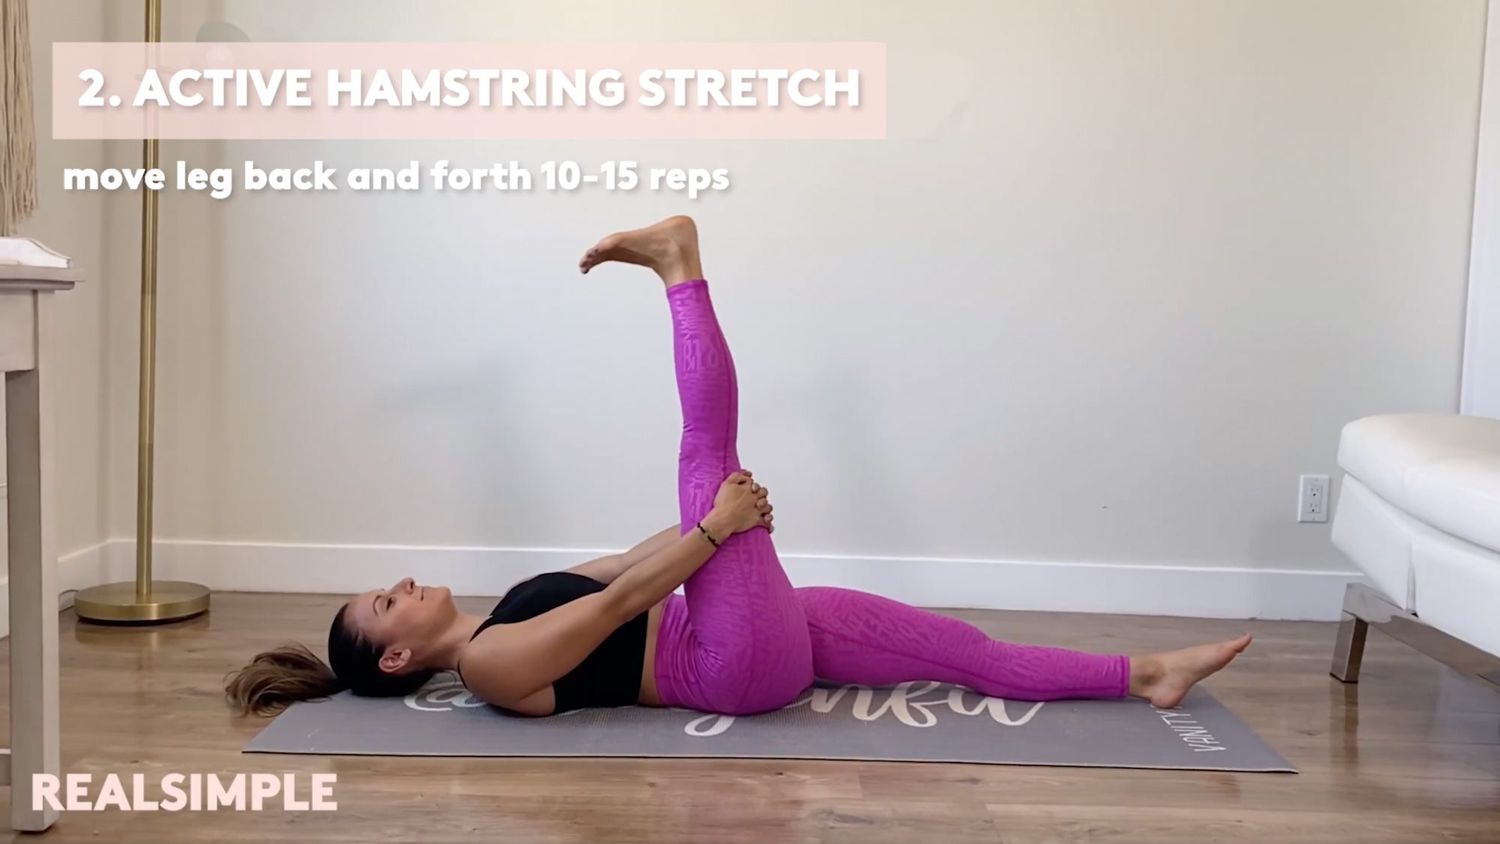 Active Hamstring Stretch for back pain